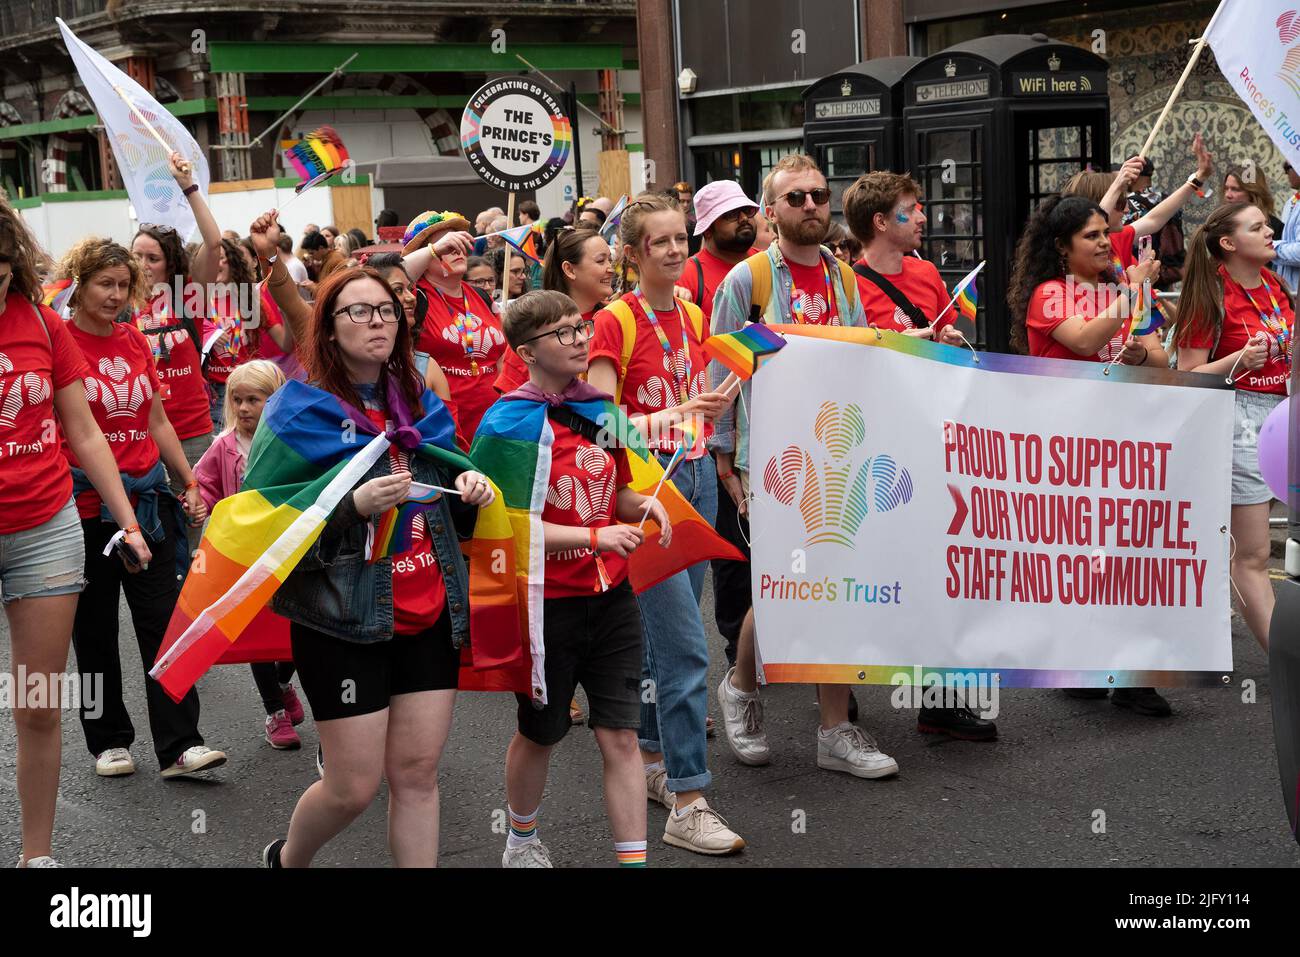 Piccadilly, London, UK. 2nd July 2022. London Pride March 2022. Celebrating 50 Years of Pride in the UK and following the same central London route taken in 1972. Princes Trust London Pride banner. Credit: Stephen Bell/Alamy Stock Photo